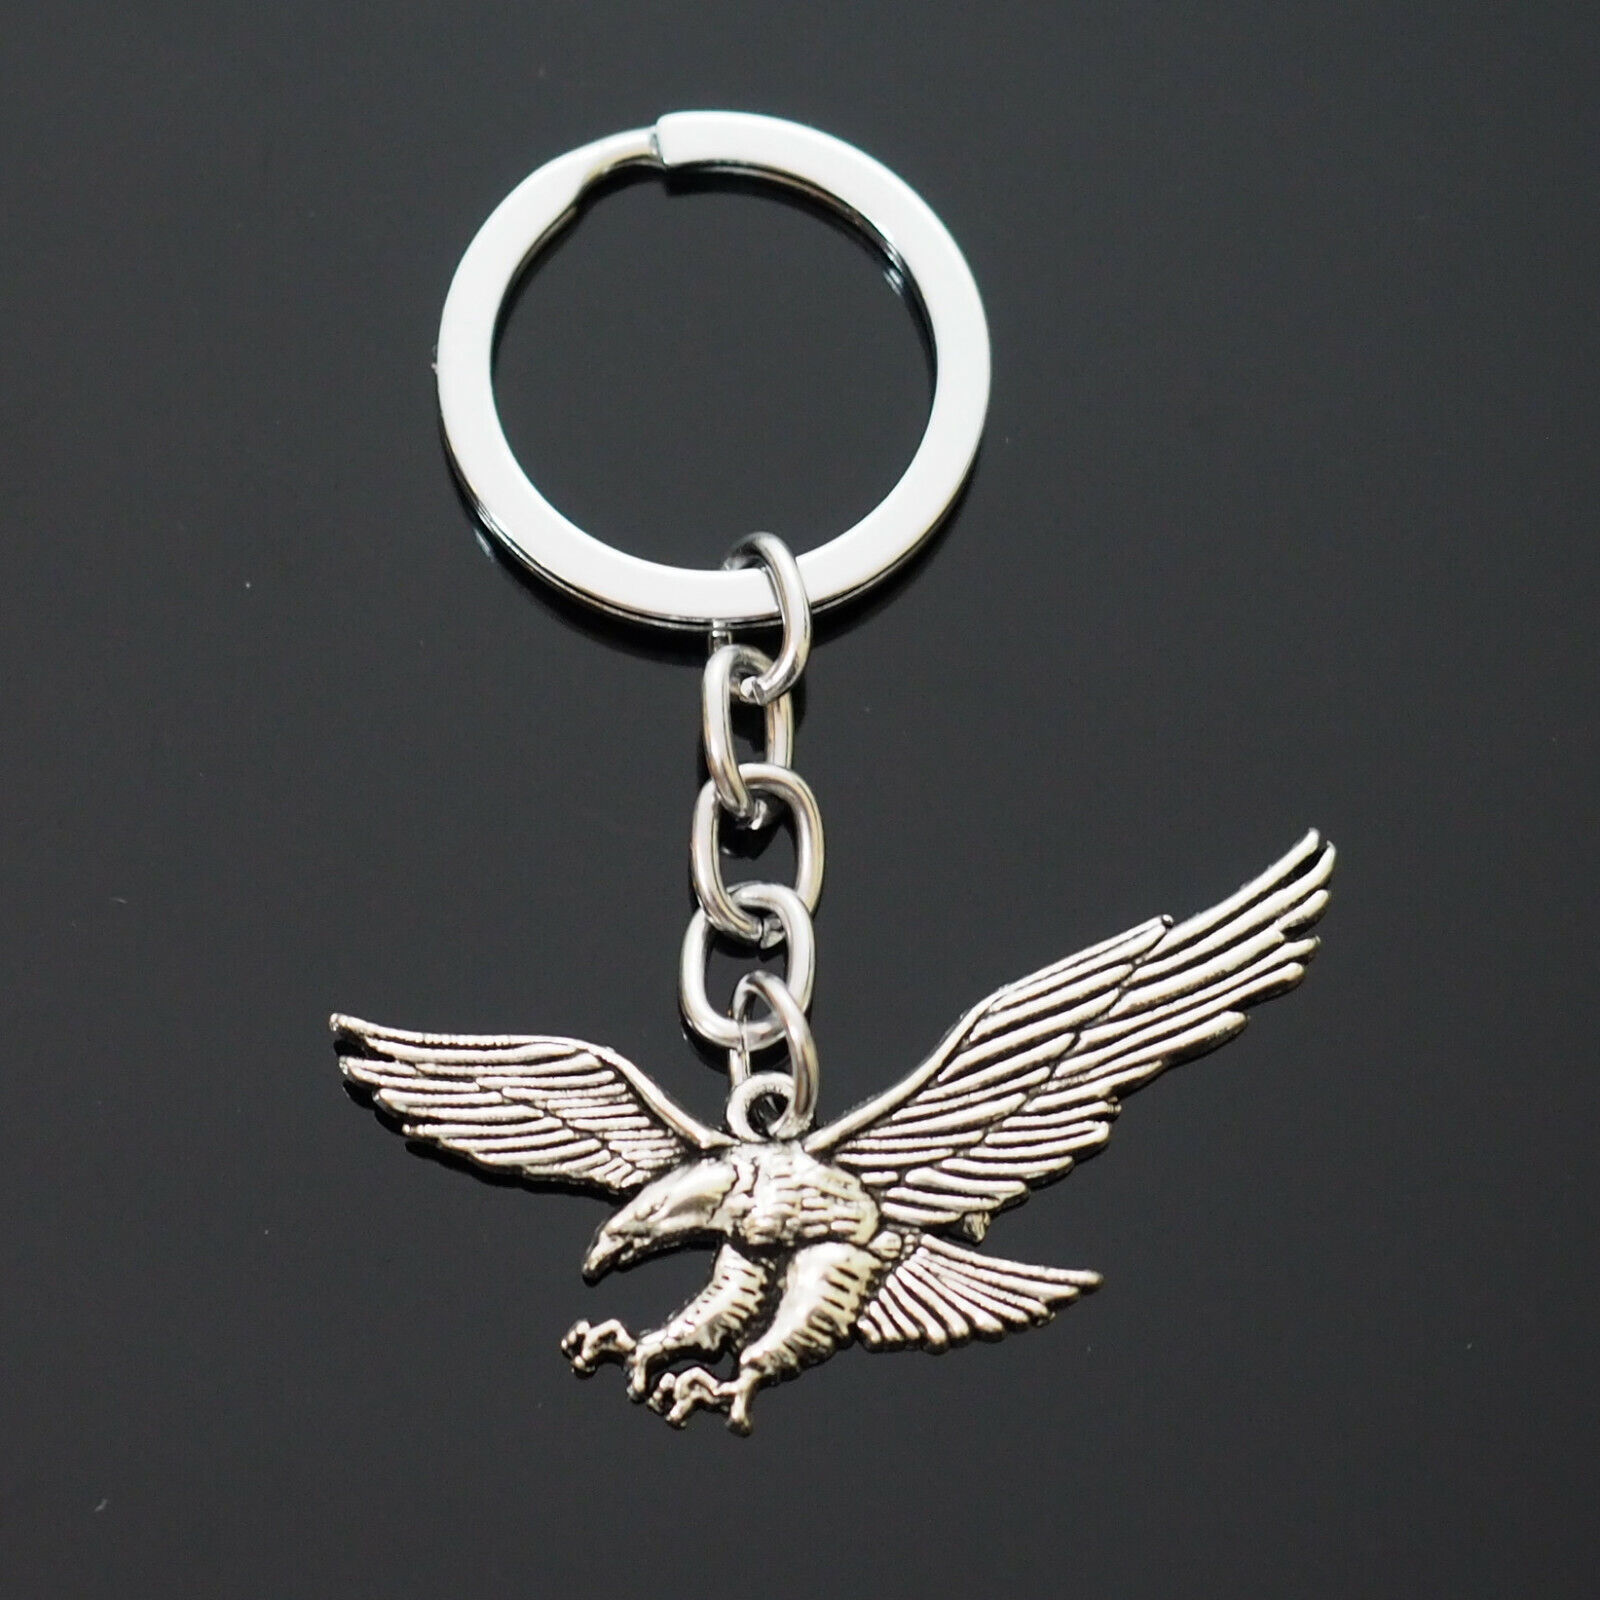 Vintage Soaring Eagle Wide Wing Claws Out Silver Charm Keychain Key Chain Gift